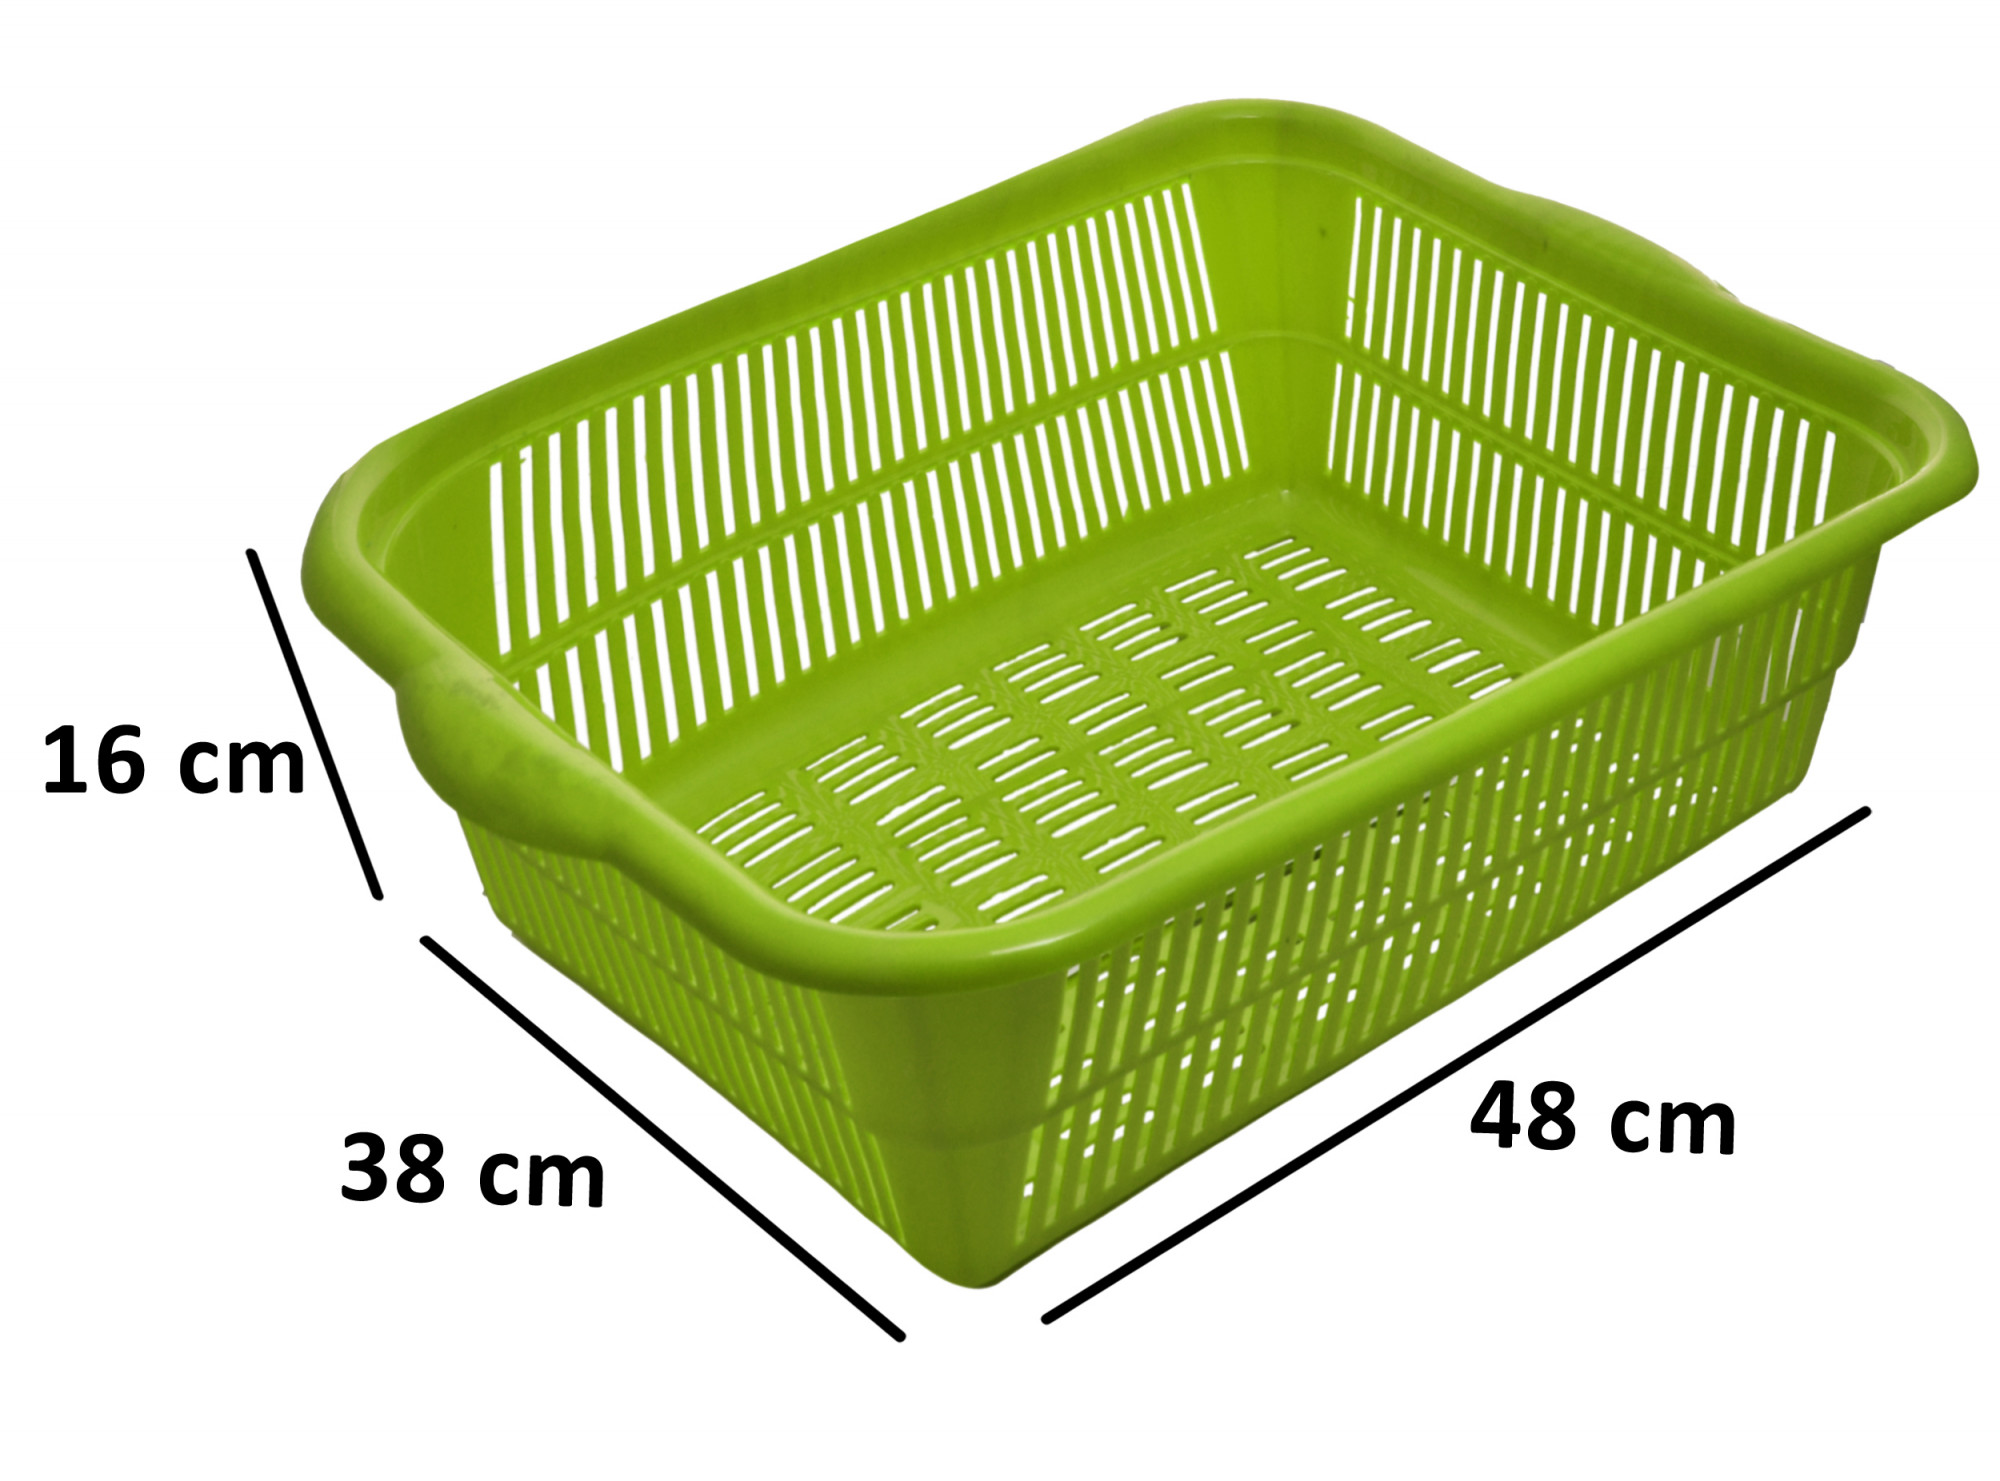 Kuber Industries 2 Pieces Plastic Kitchen Dish Rack Drainer Vegetables And Fruits Basket Dish Rack Multipurpose Organizers ,Large Size,Green & Yellow